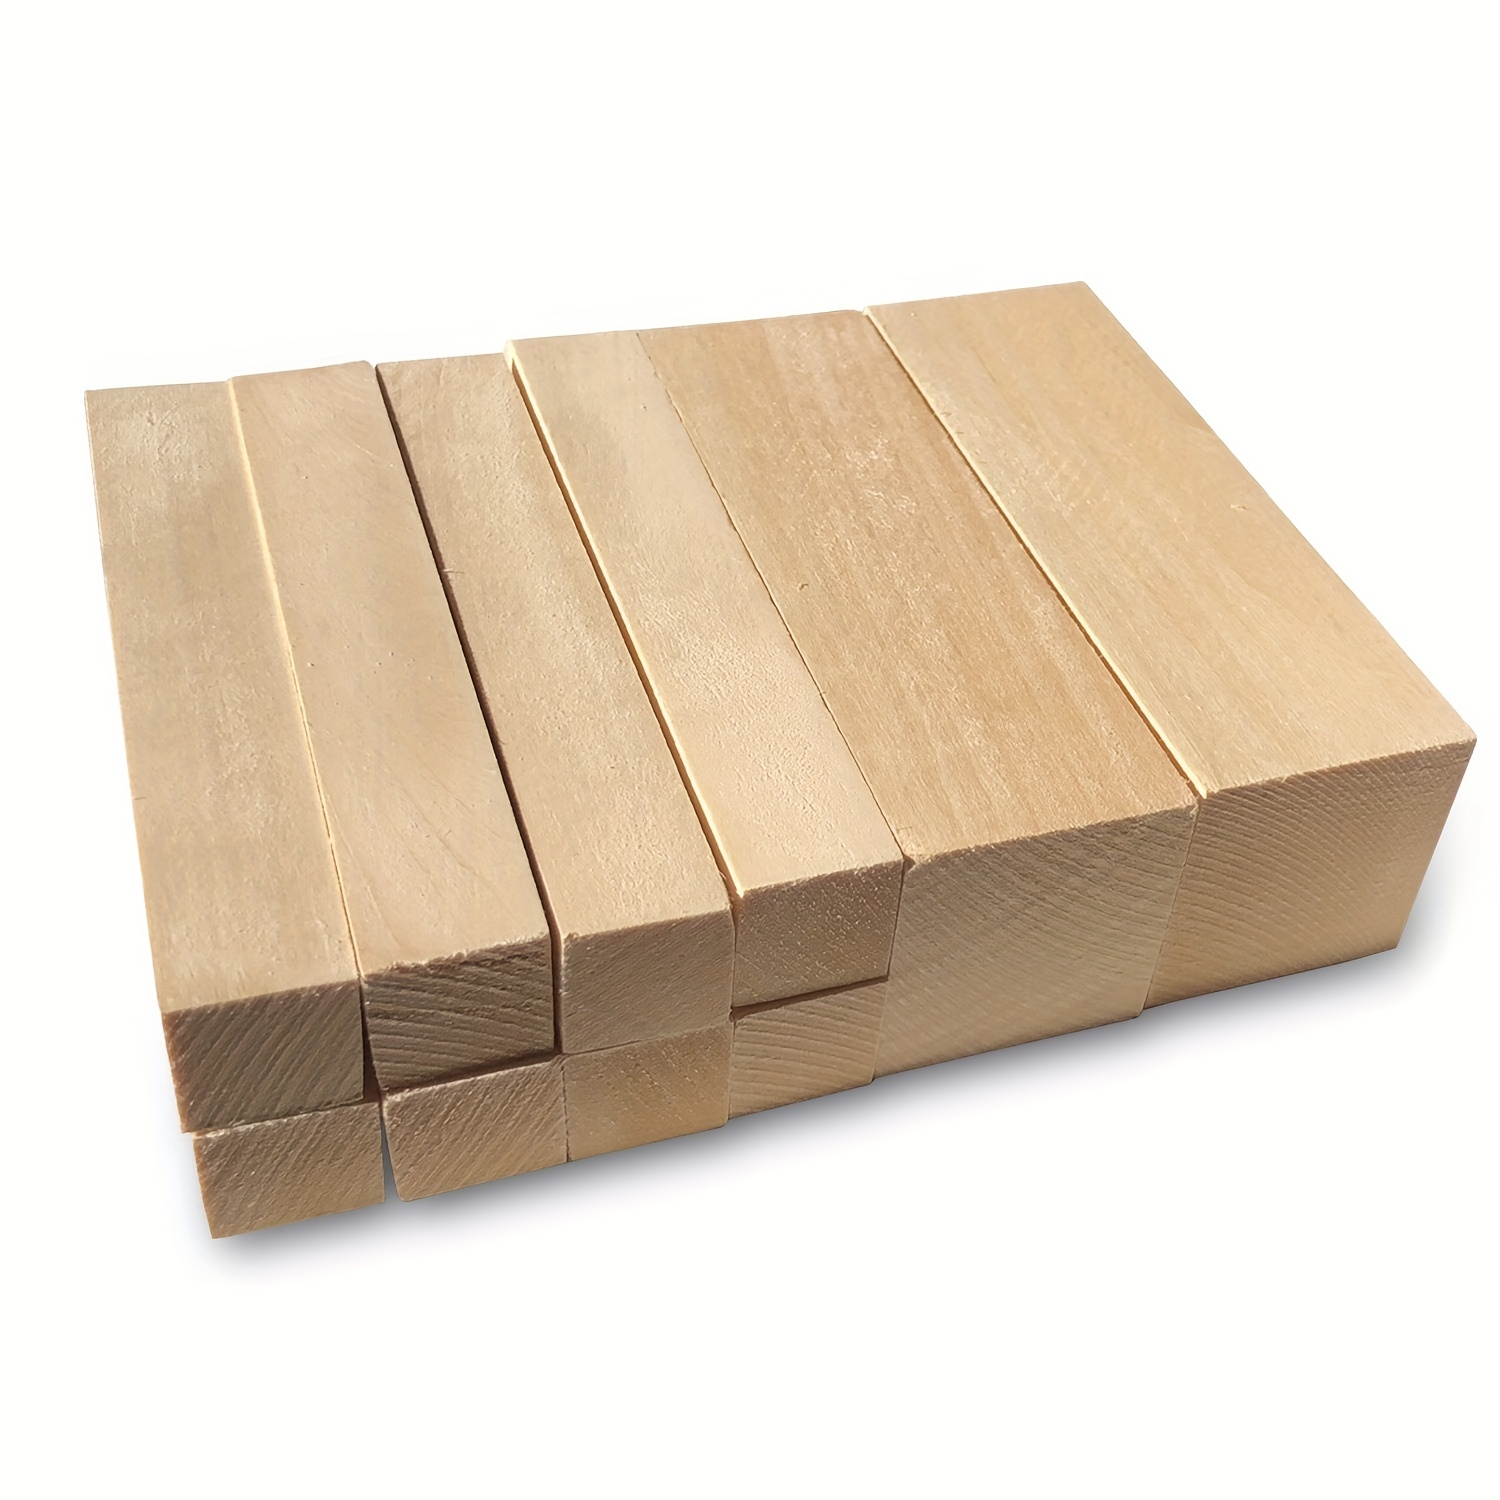 5pcs Basswood Carving Block Natural Soft Wood Carving Block 2 Sizes Portable Unfinished Wood Block Carving Whittling Art Supplies for Beginner Expert